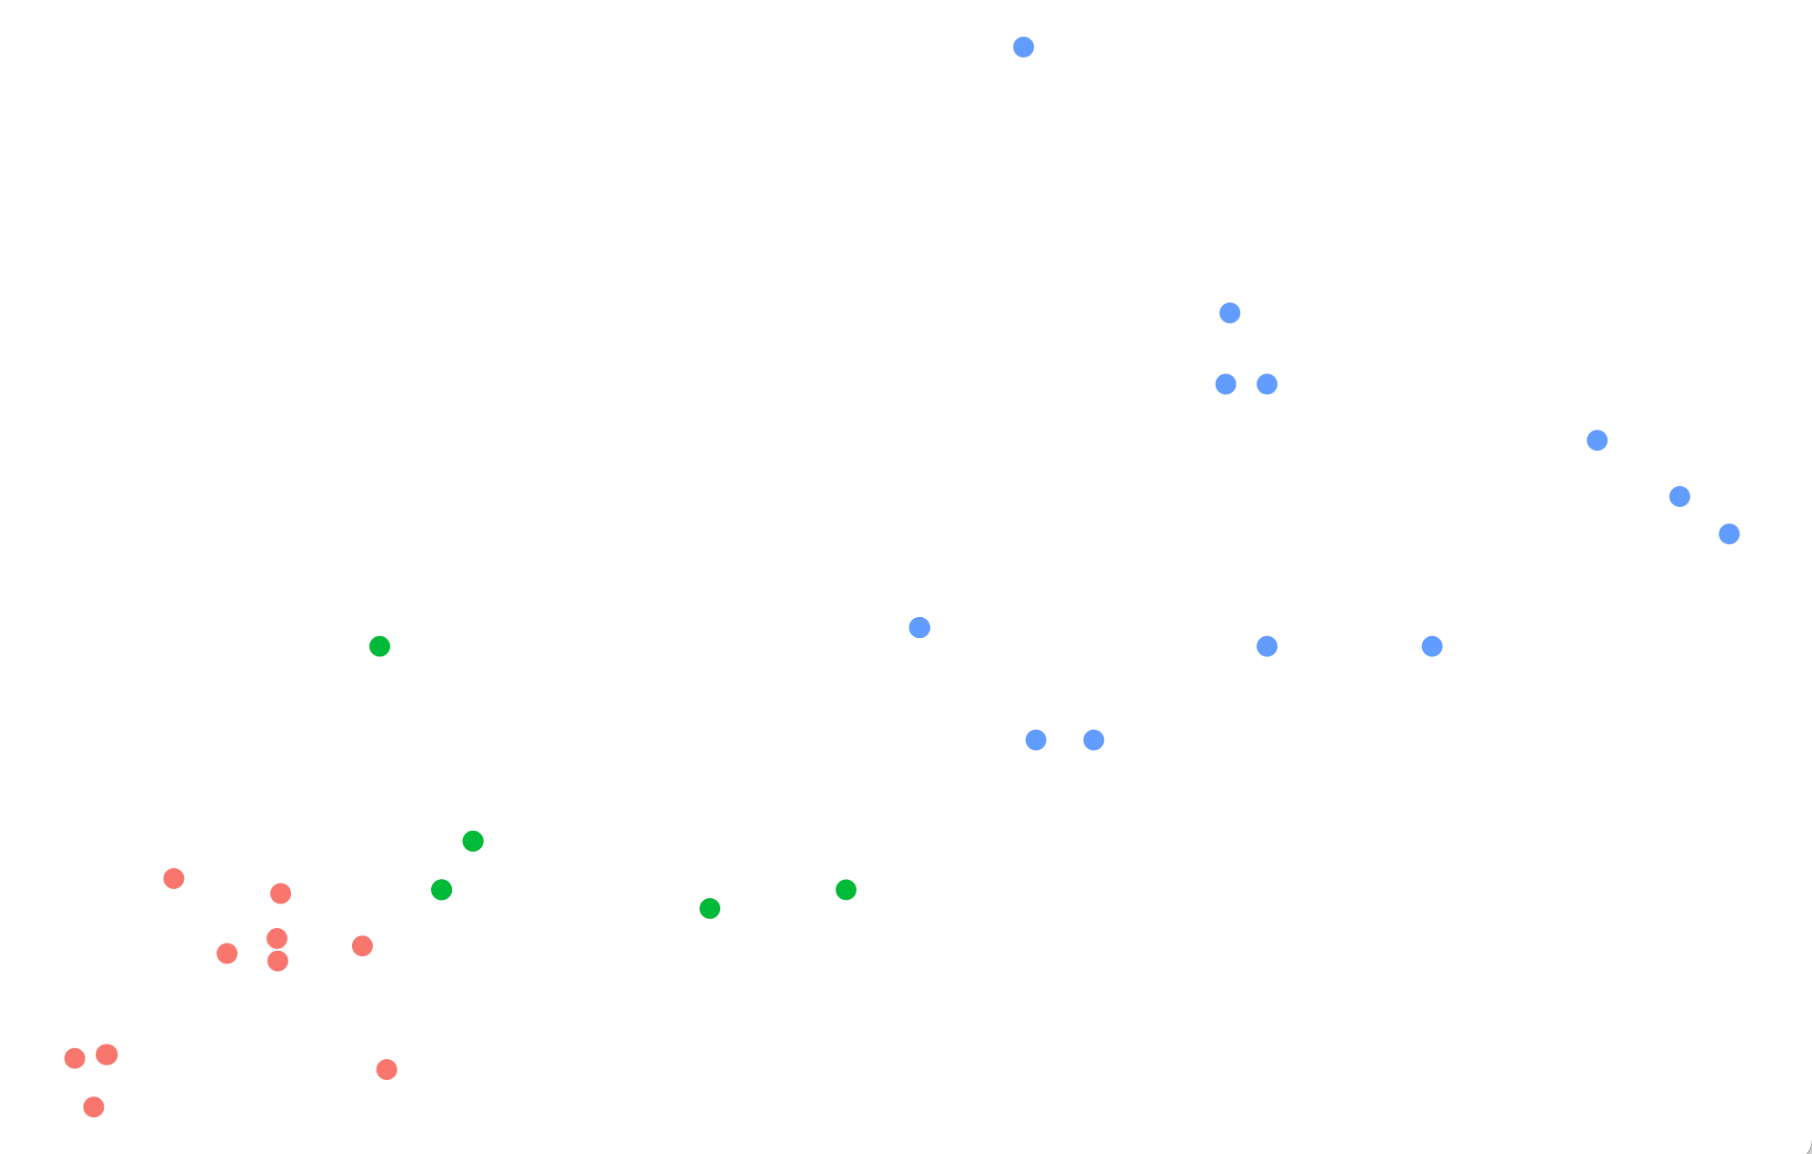 A set of coloured dots, without axes or labels